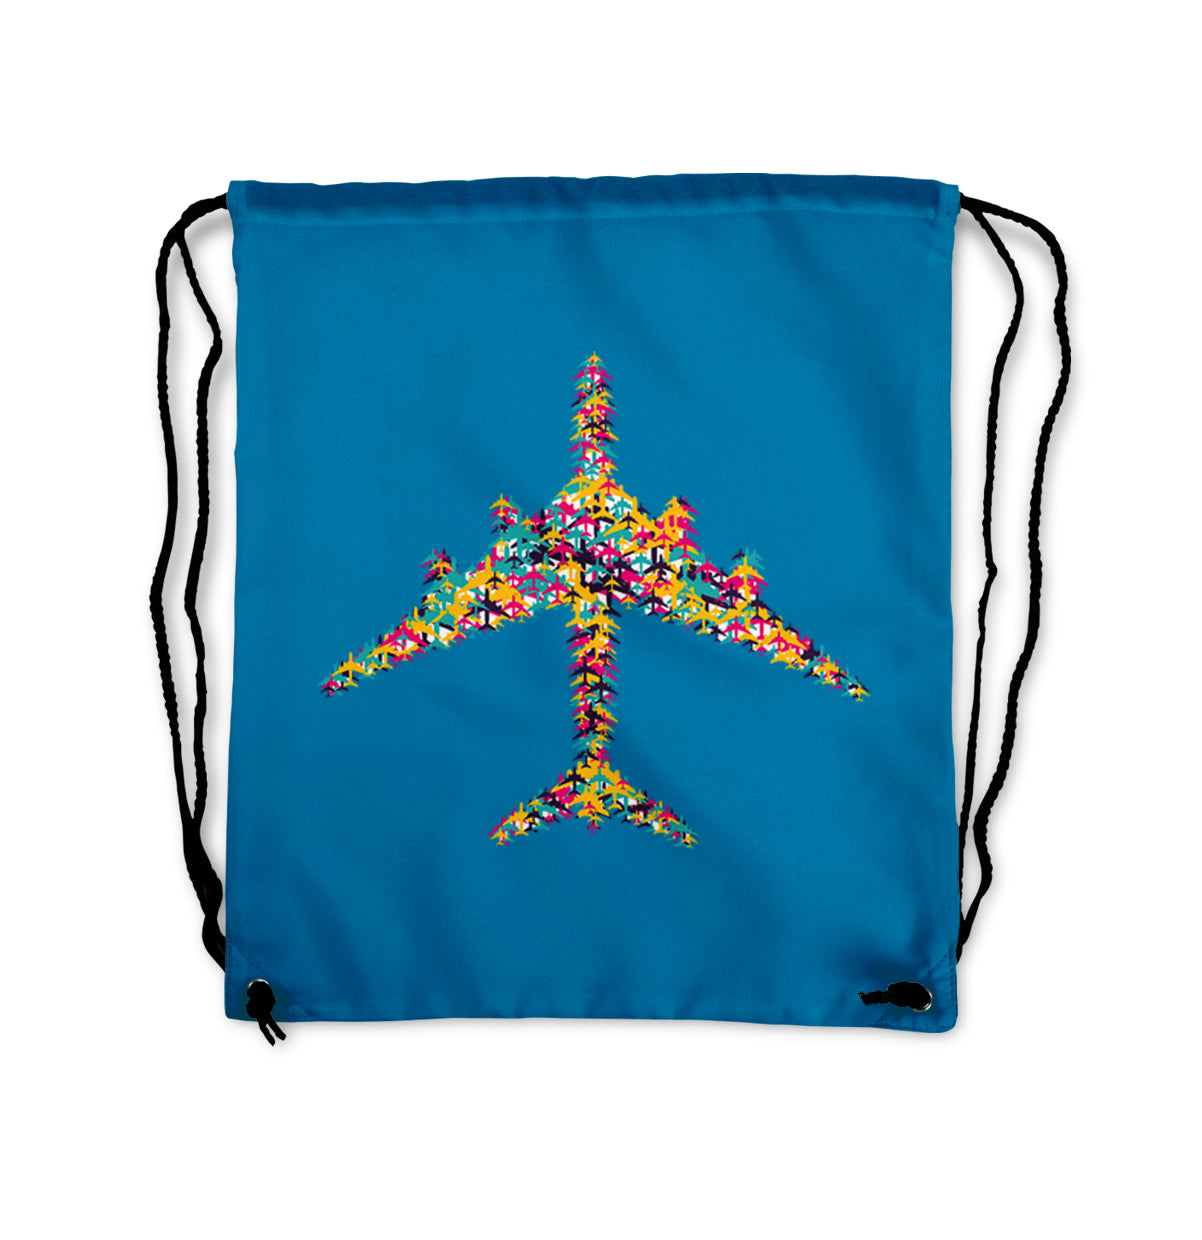 Colourful Airplane Designed Drawstring Bags